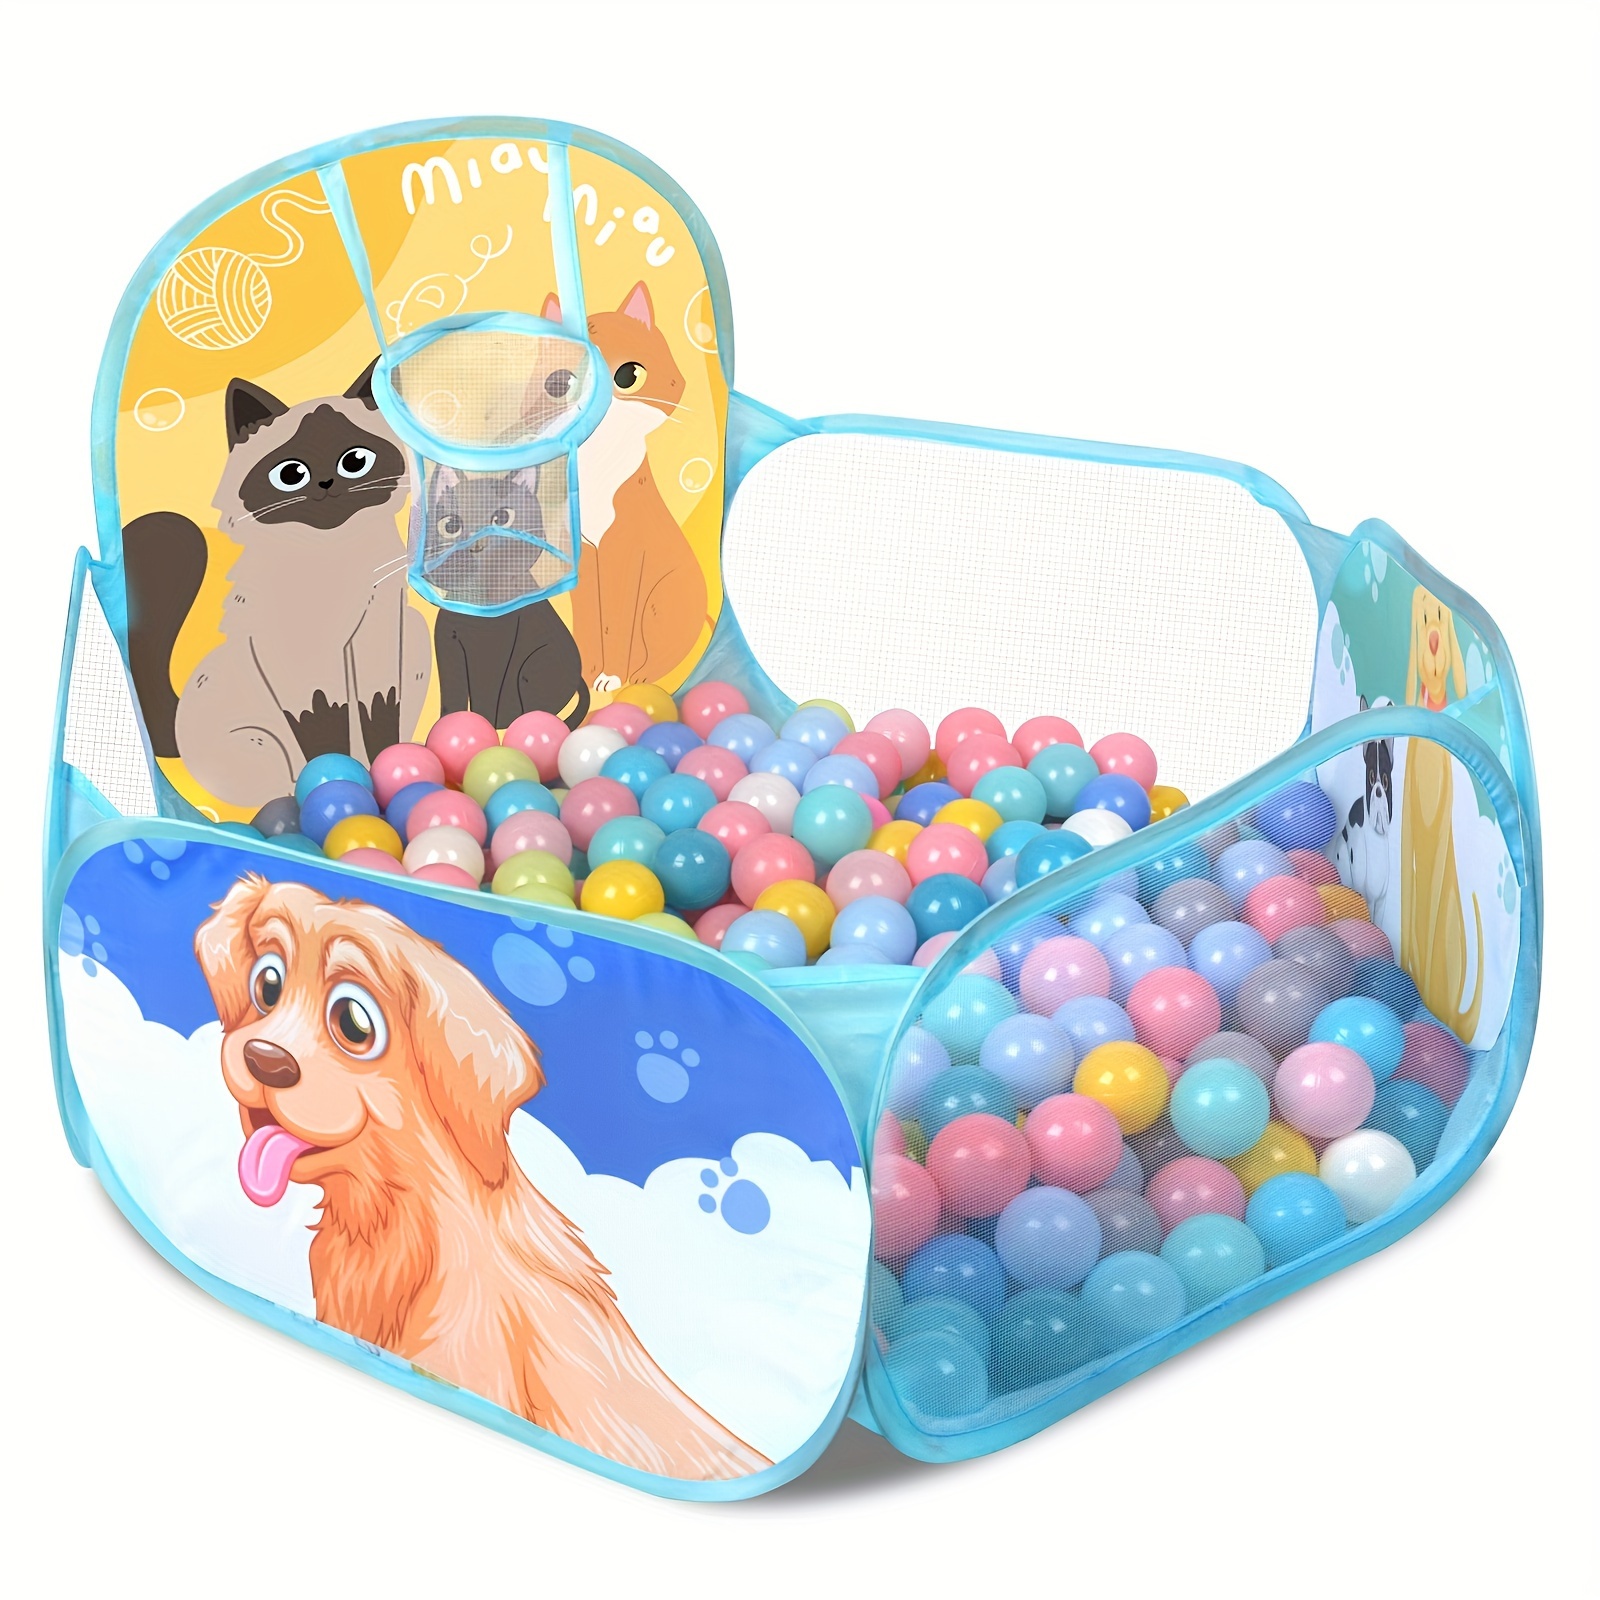 

Kids Ball Pit Pop Up Play Tent Playhouse Cat Dog Tipi With Basketball For Childrens Boys Girls Toddlers Baby Foldable Birthday Toy Themed Pretend Indoor Outdoor Games Party Crawl (balls Not Included)